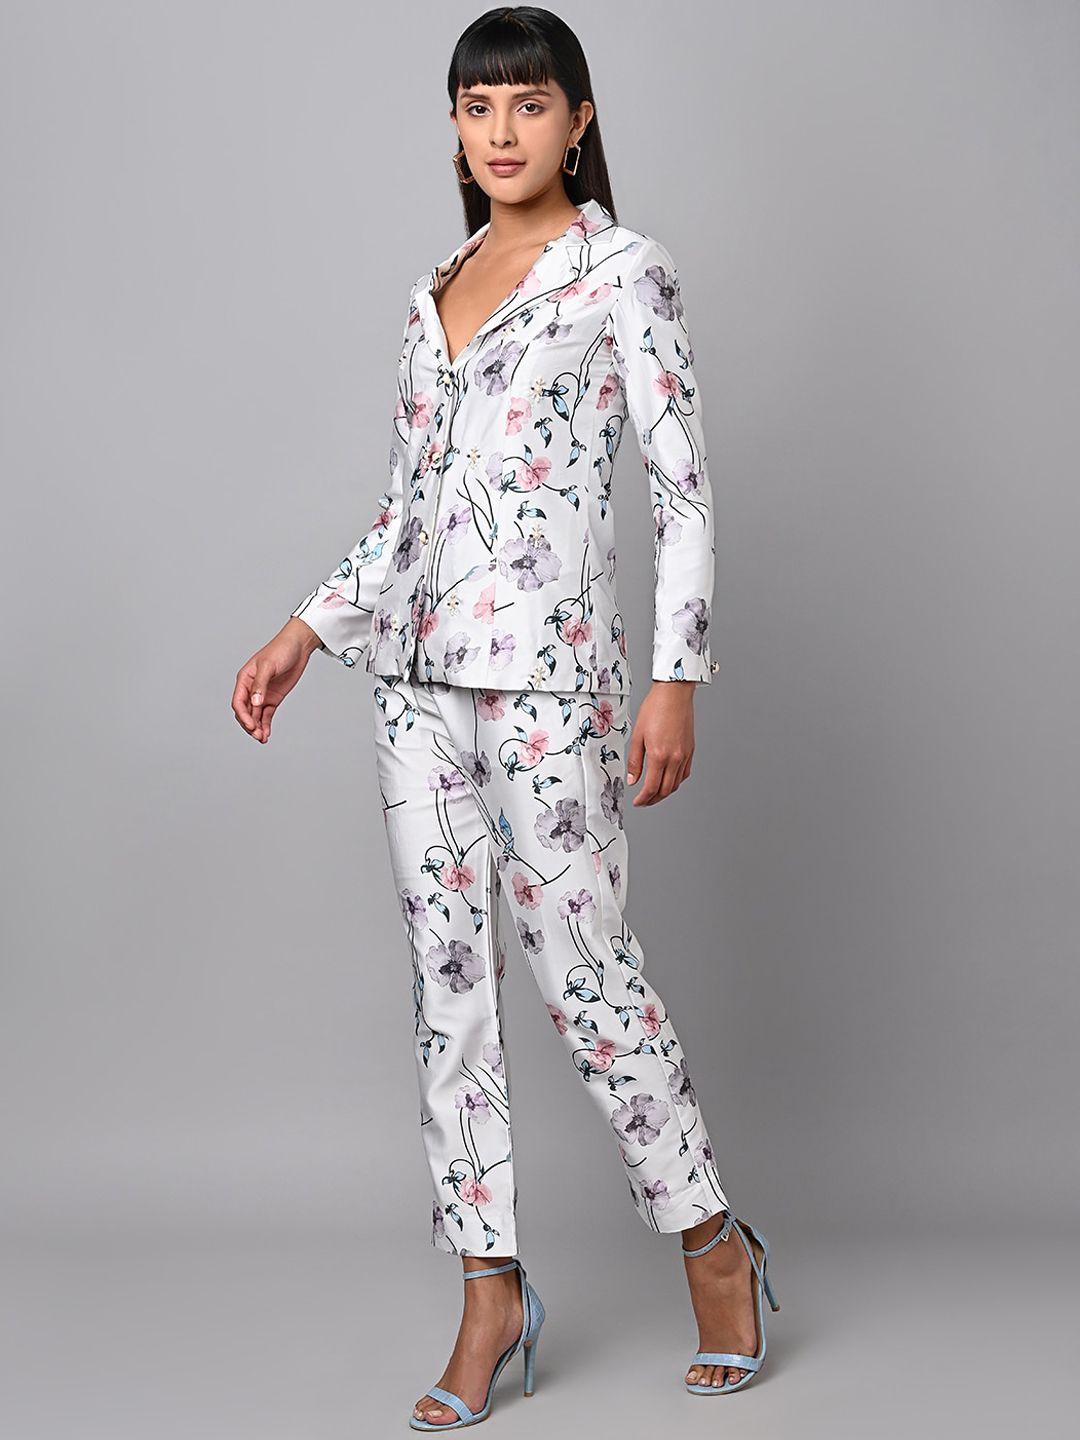 justin whyte floral printed coat with trousers co-ords